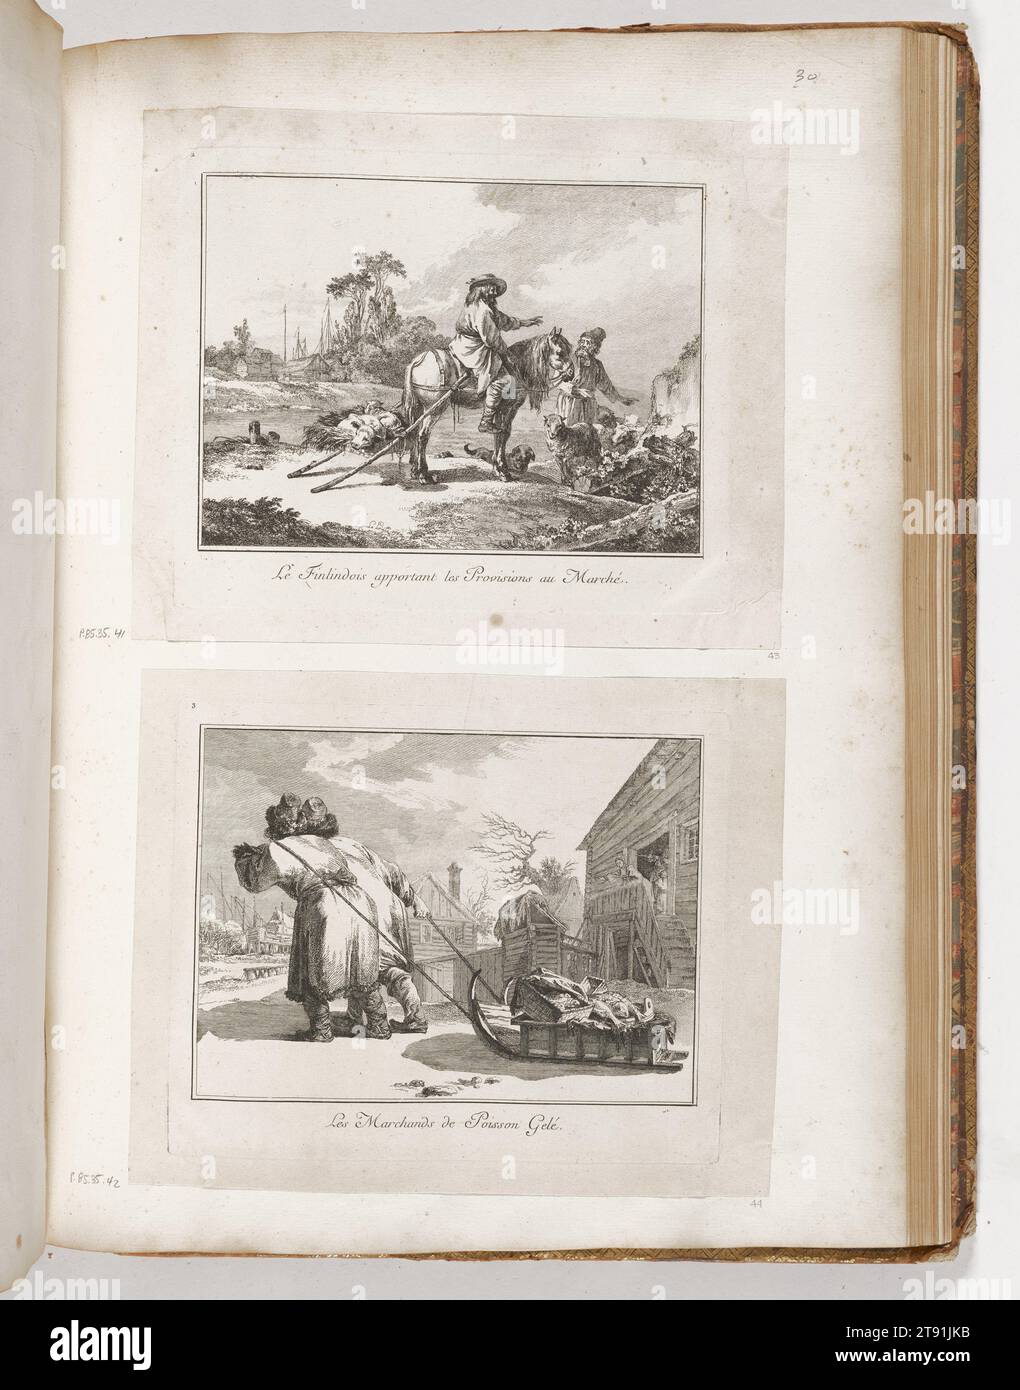 Finn Bringing Goods to the Market, 1765, Jean-Baptiste Le Prince, French, 1734 - 1781, 6 1/2 x 8 3/4 in. (16.51 x 22.23 cm) (image)8 x 9 1/2 in. (20.32 x 24.13 cm) (plate)9 1/4 x 11 3/8 in. (23.5 x 28.89 cm) (sheet), Etching, France, 18th century Stock Photo